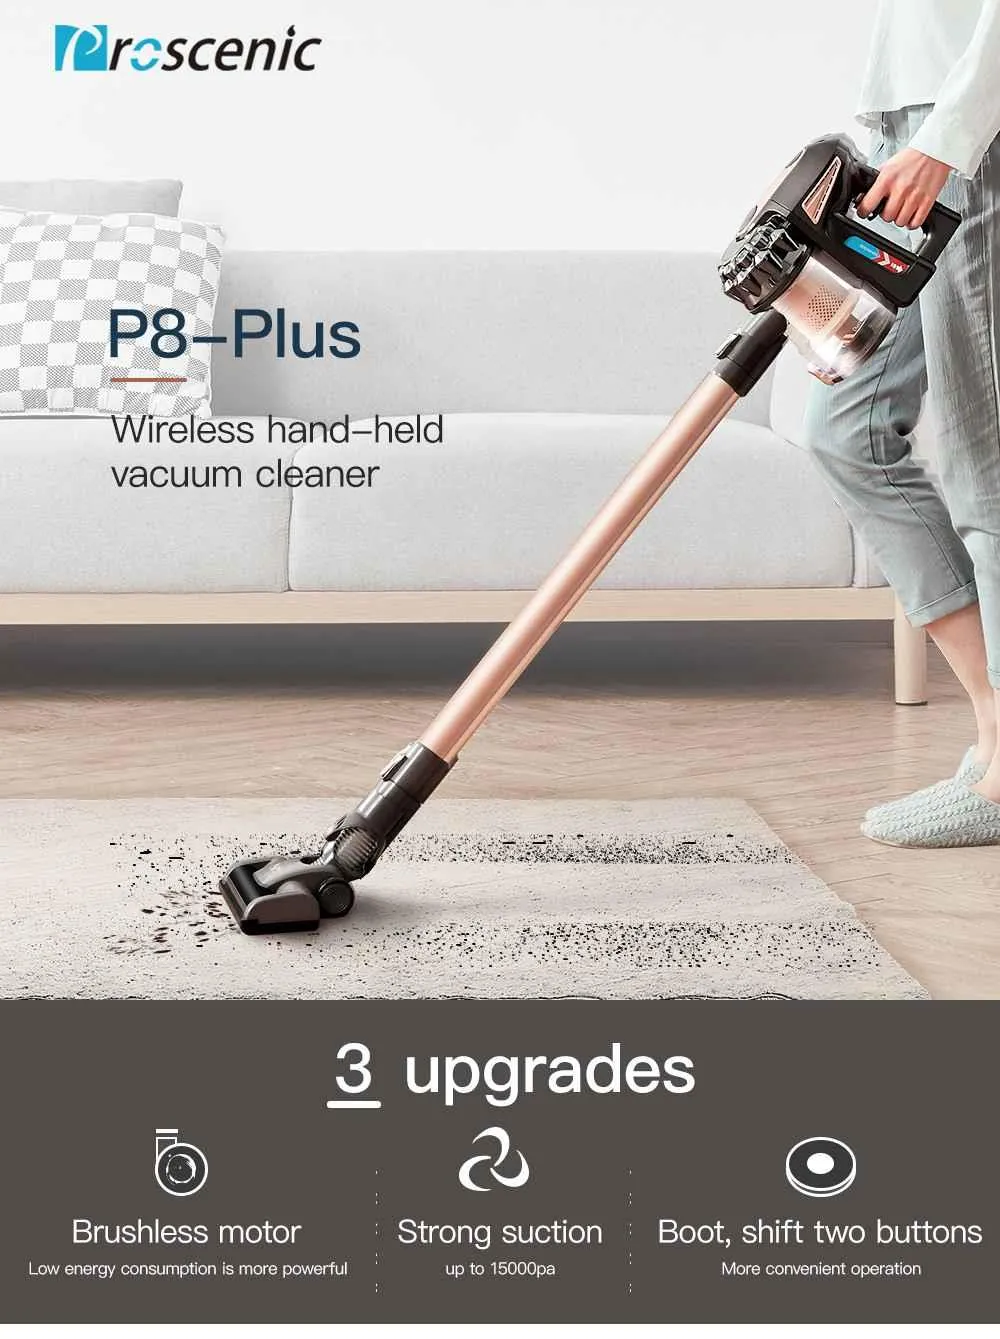 Proscenic P8 PLUS 15000Pa Protable Handheld Wireless Vacuum Cleaner for Home Cordless Carpet Cleaner Cyclone Dust Collector (14)